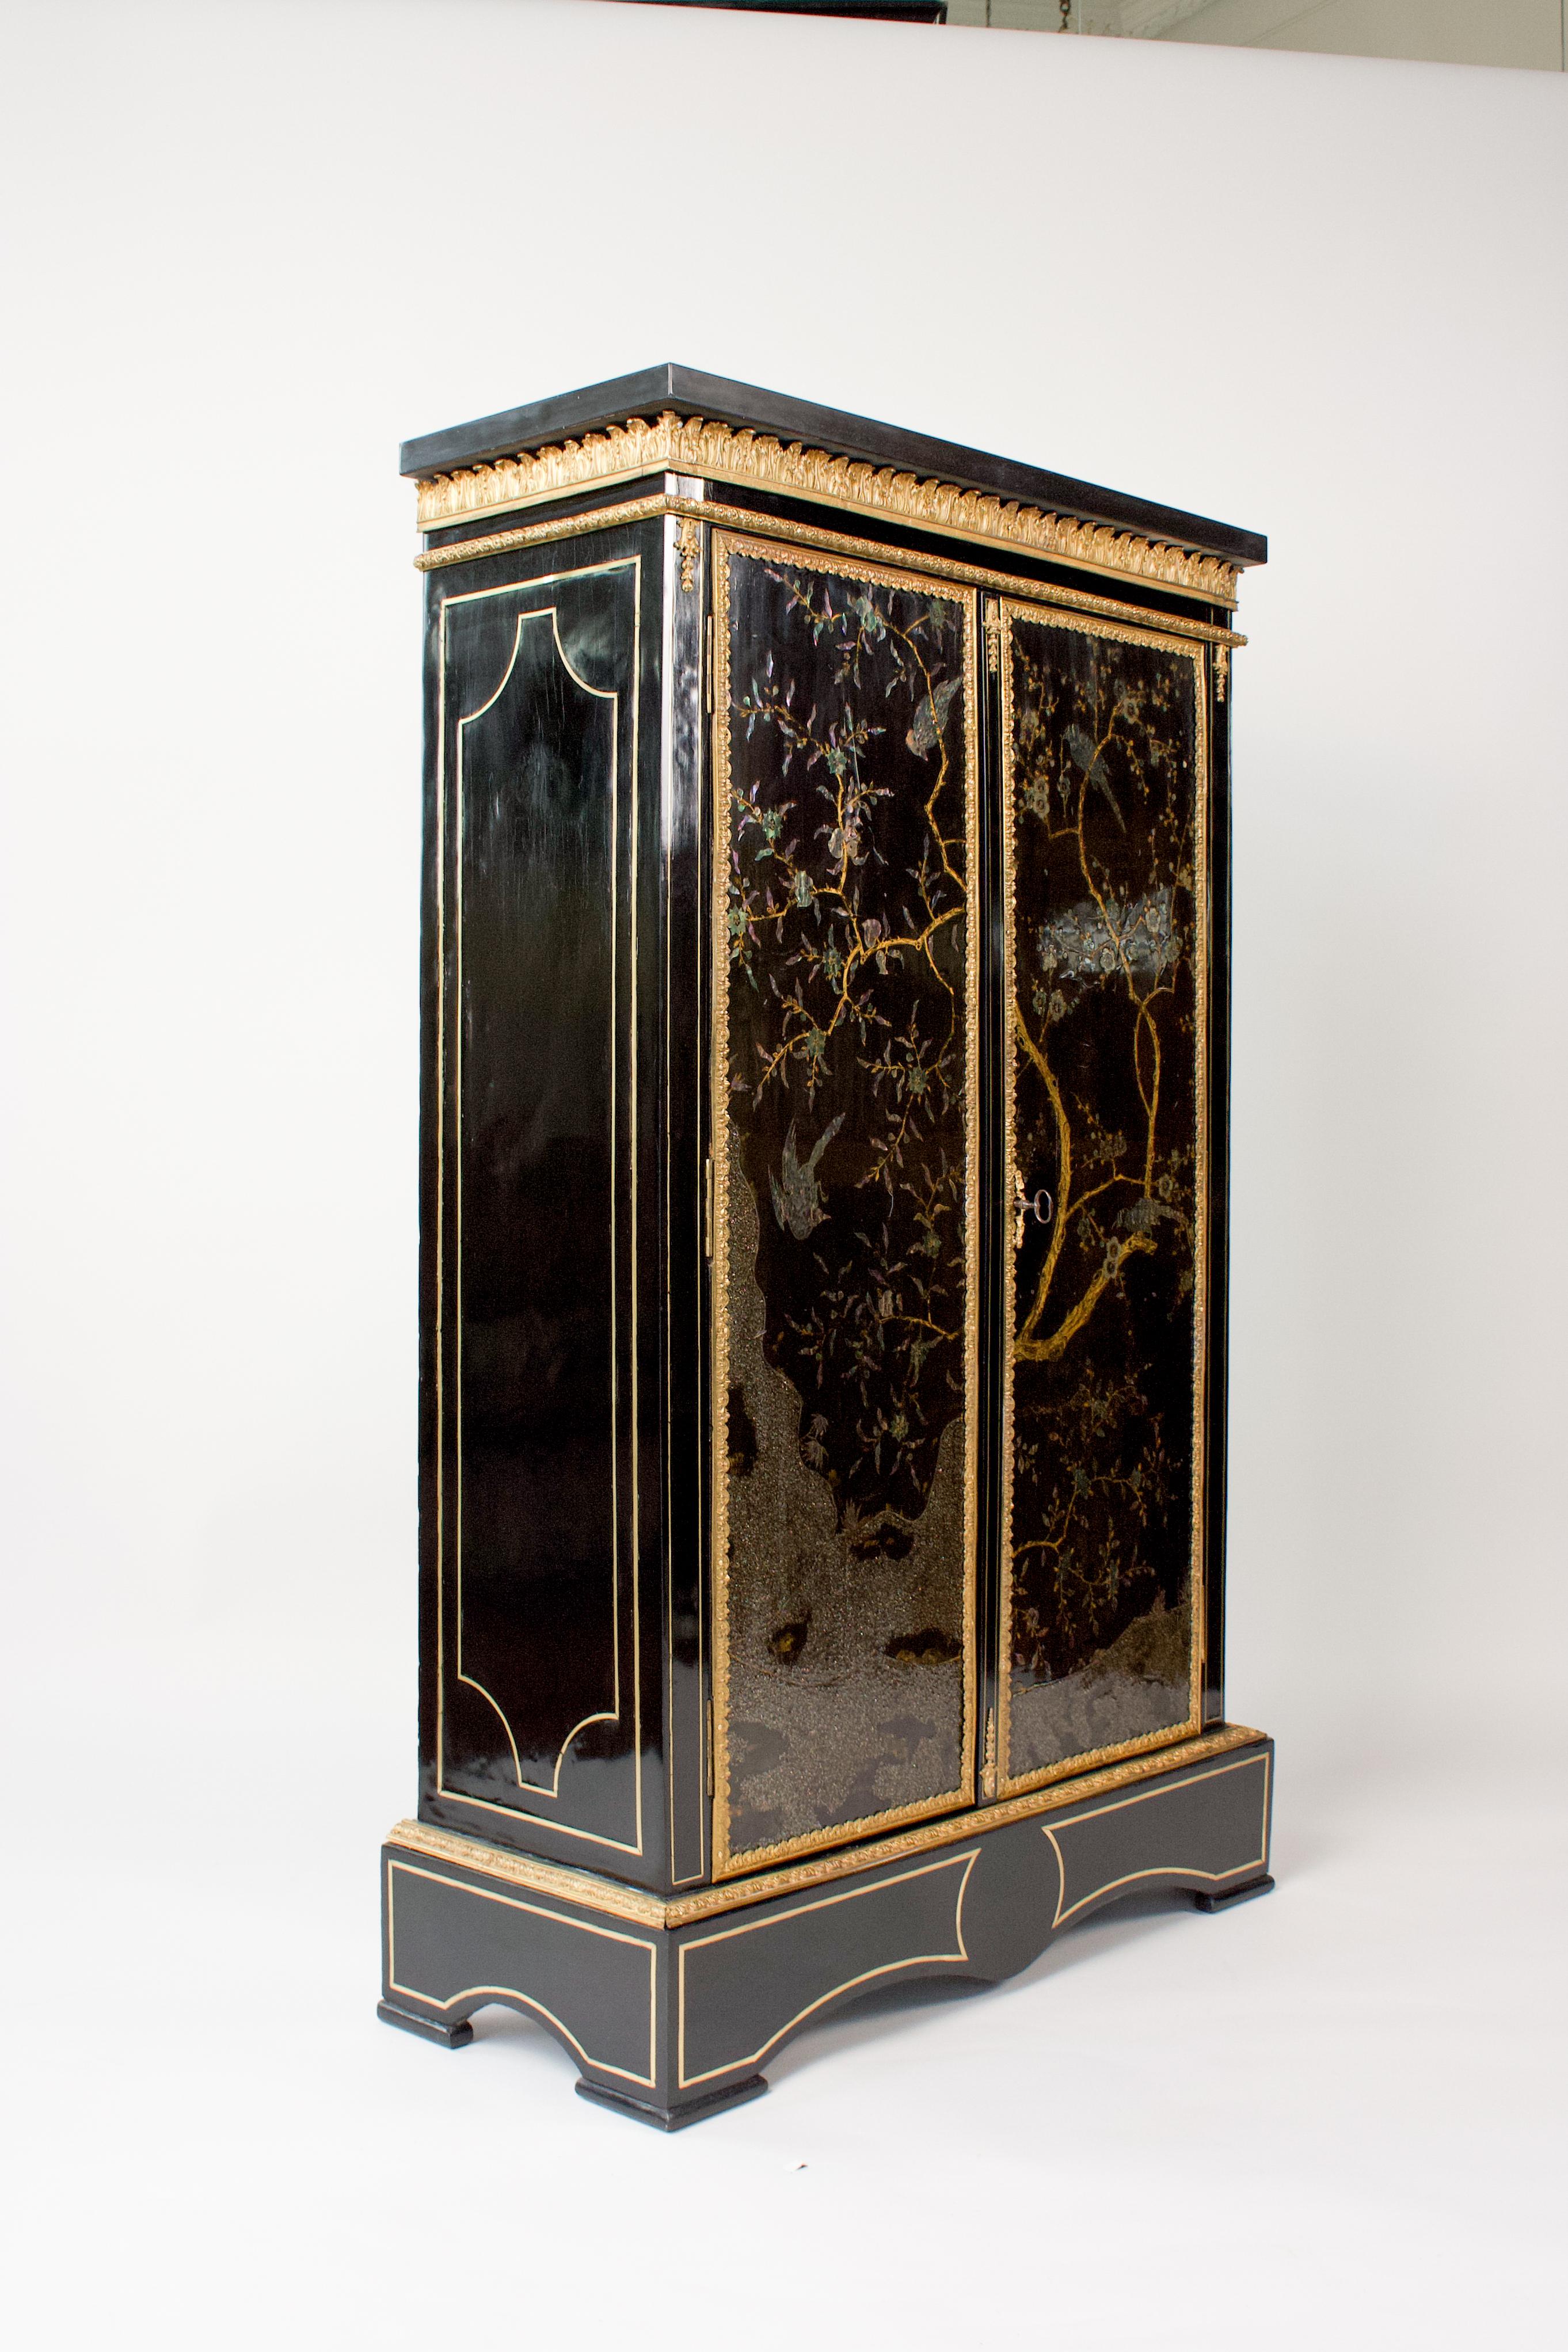 Petite 19th-century armoire in ebony veneer, adorned with brass inlay decoration.  It opens with two doors with panels of Chinese lacquer from the 17th century, featuring birds on flowering branches inlaid with mother-of-pearl.
Beautiful gilded